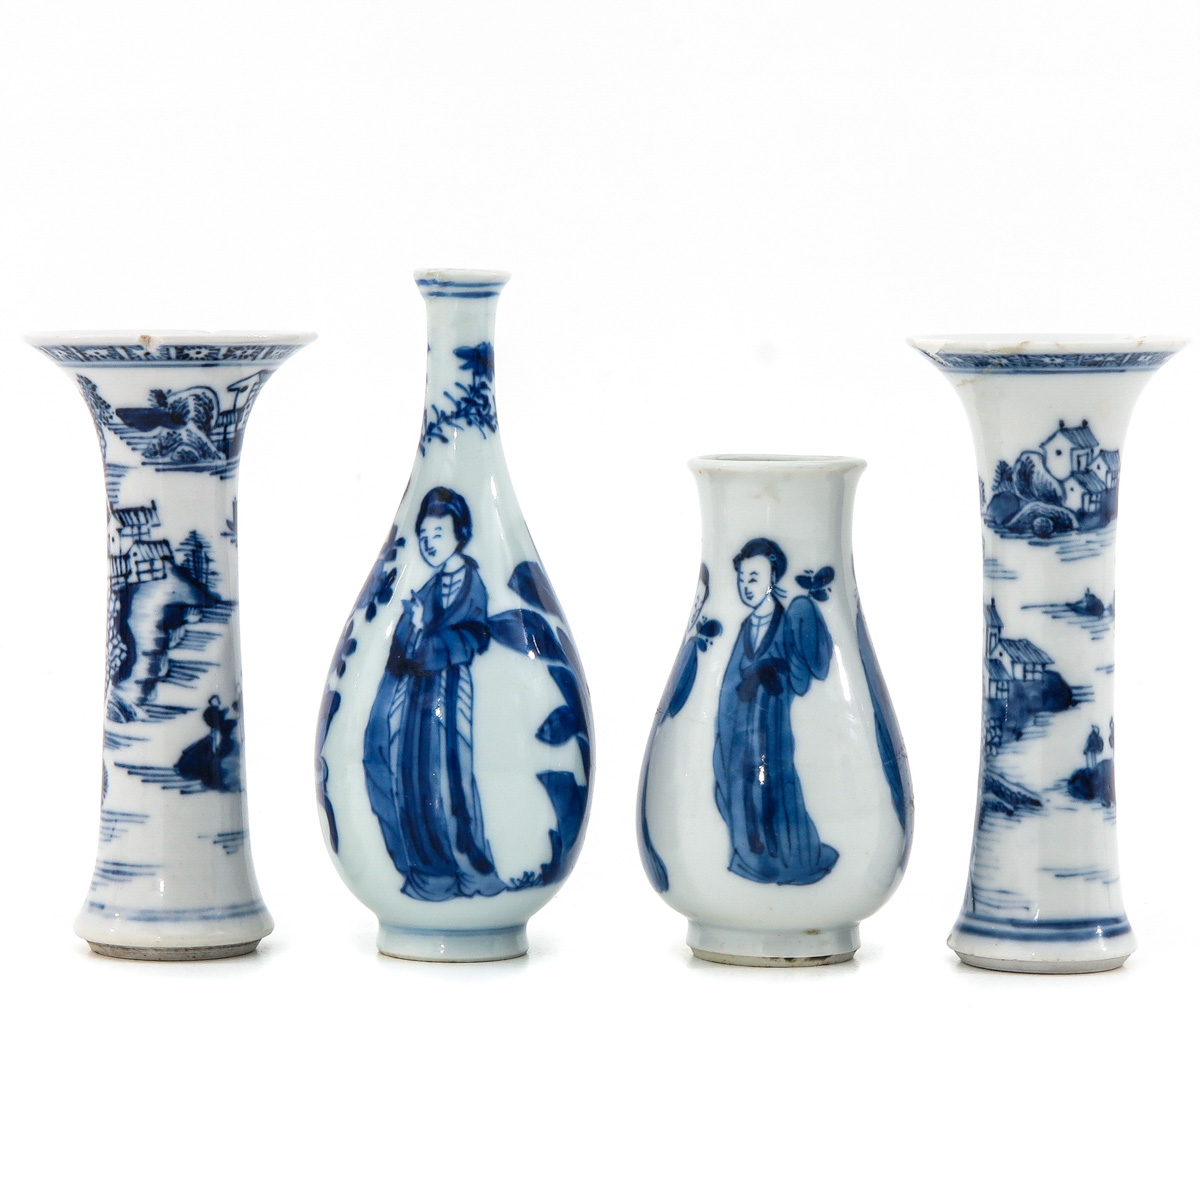 A Collection of 4 Miniature Vases - Image 2 of 10